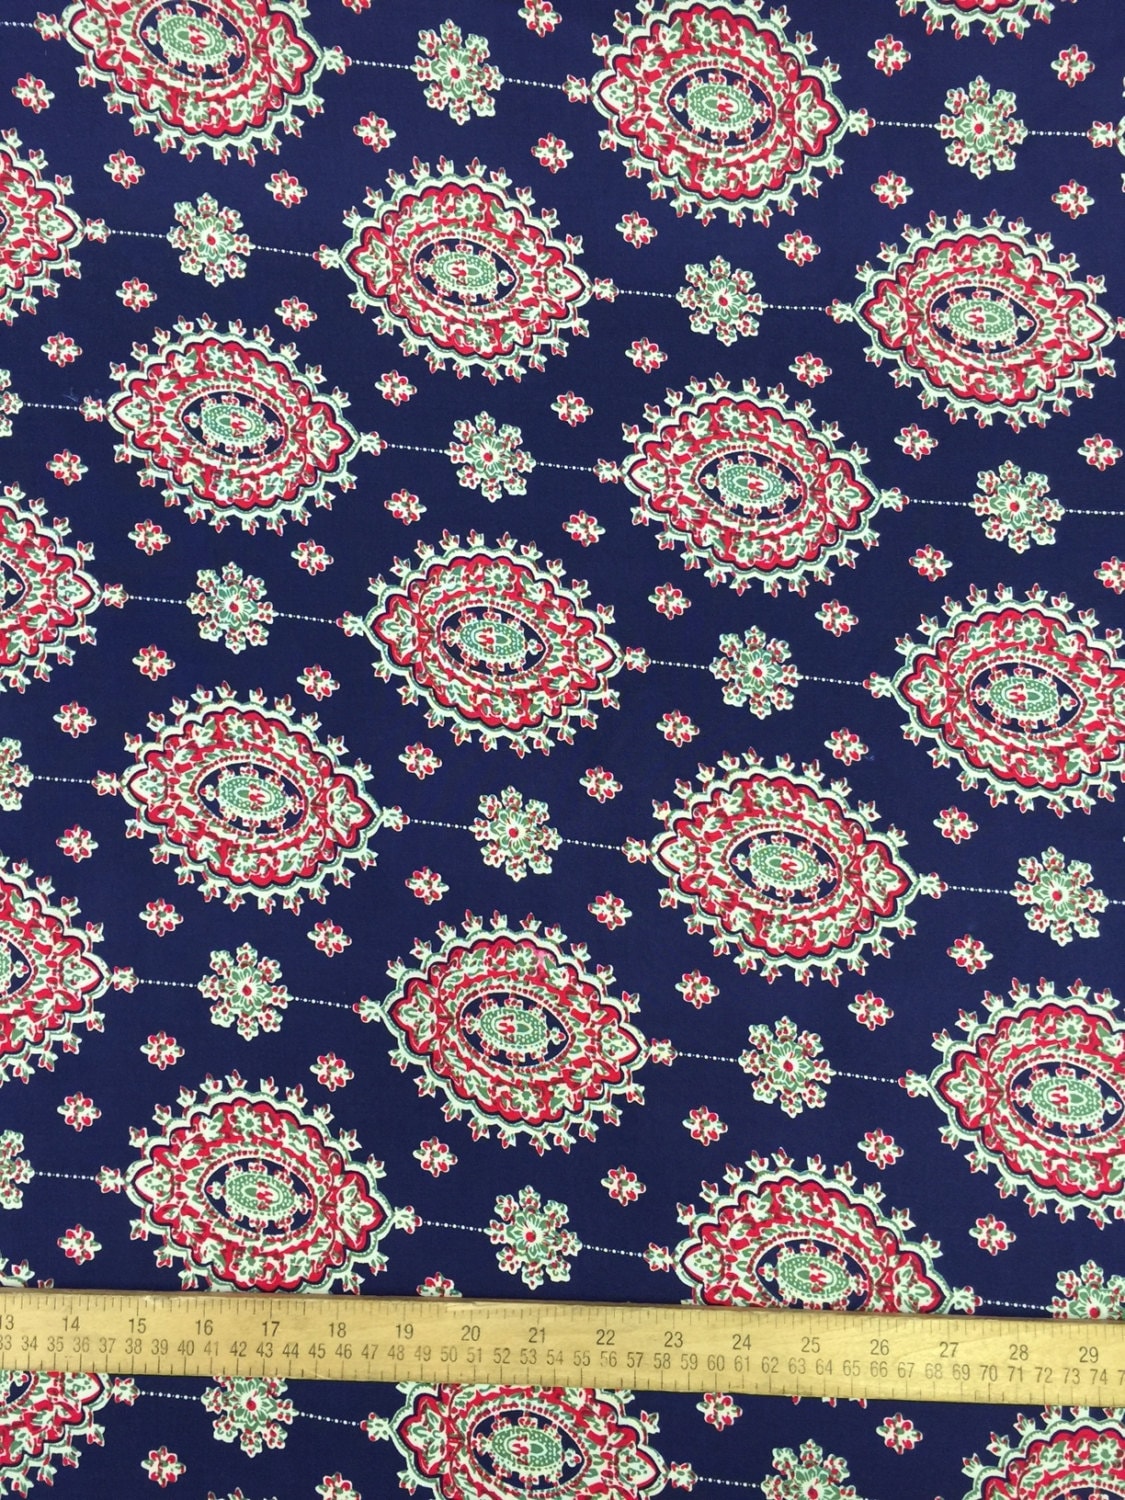 100% Japanese Rayon challis two border Navy blue and fuchsia pink design 58 inches Fabric by the yard for tablecloth, panels, decorations